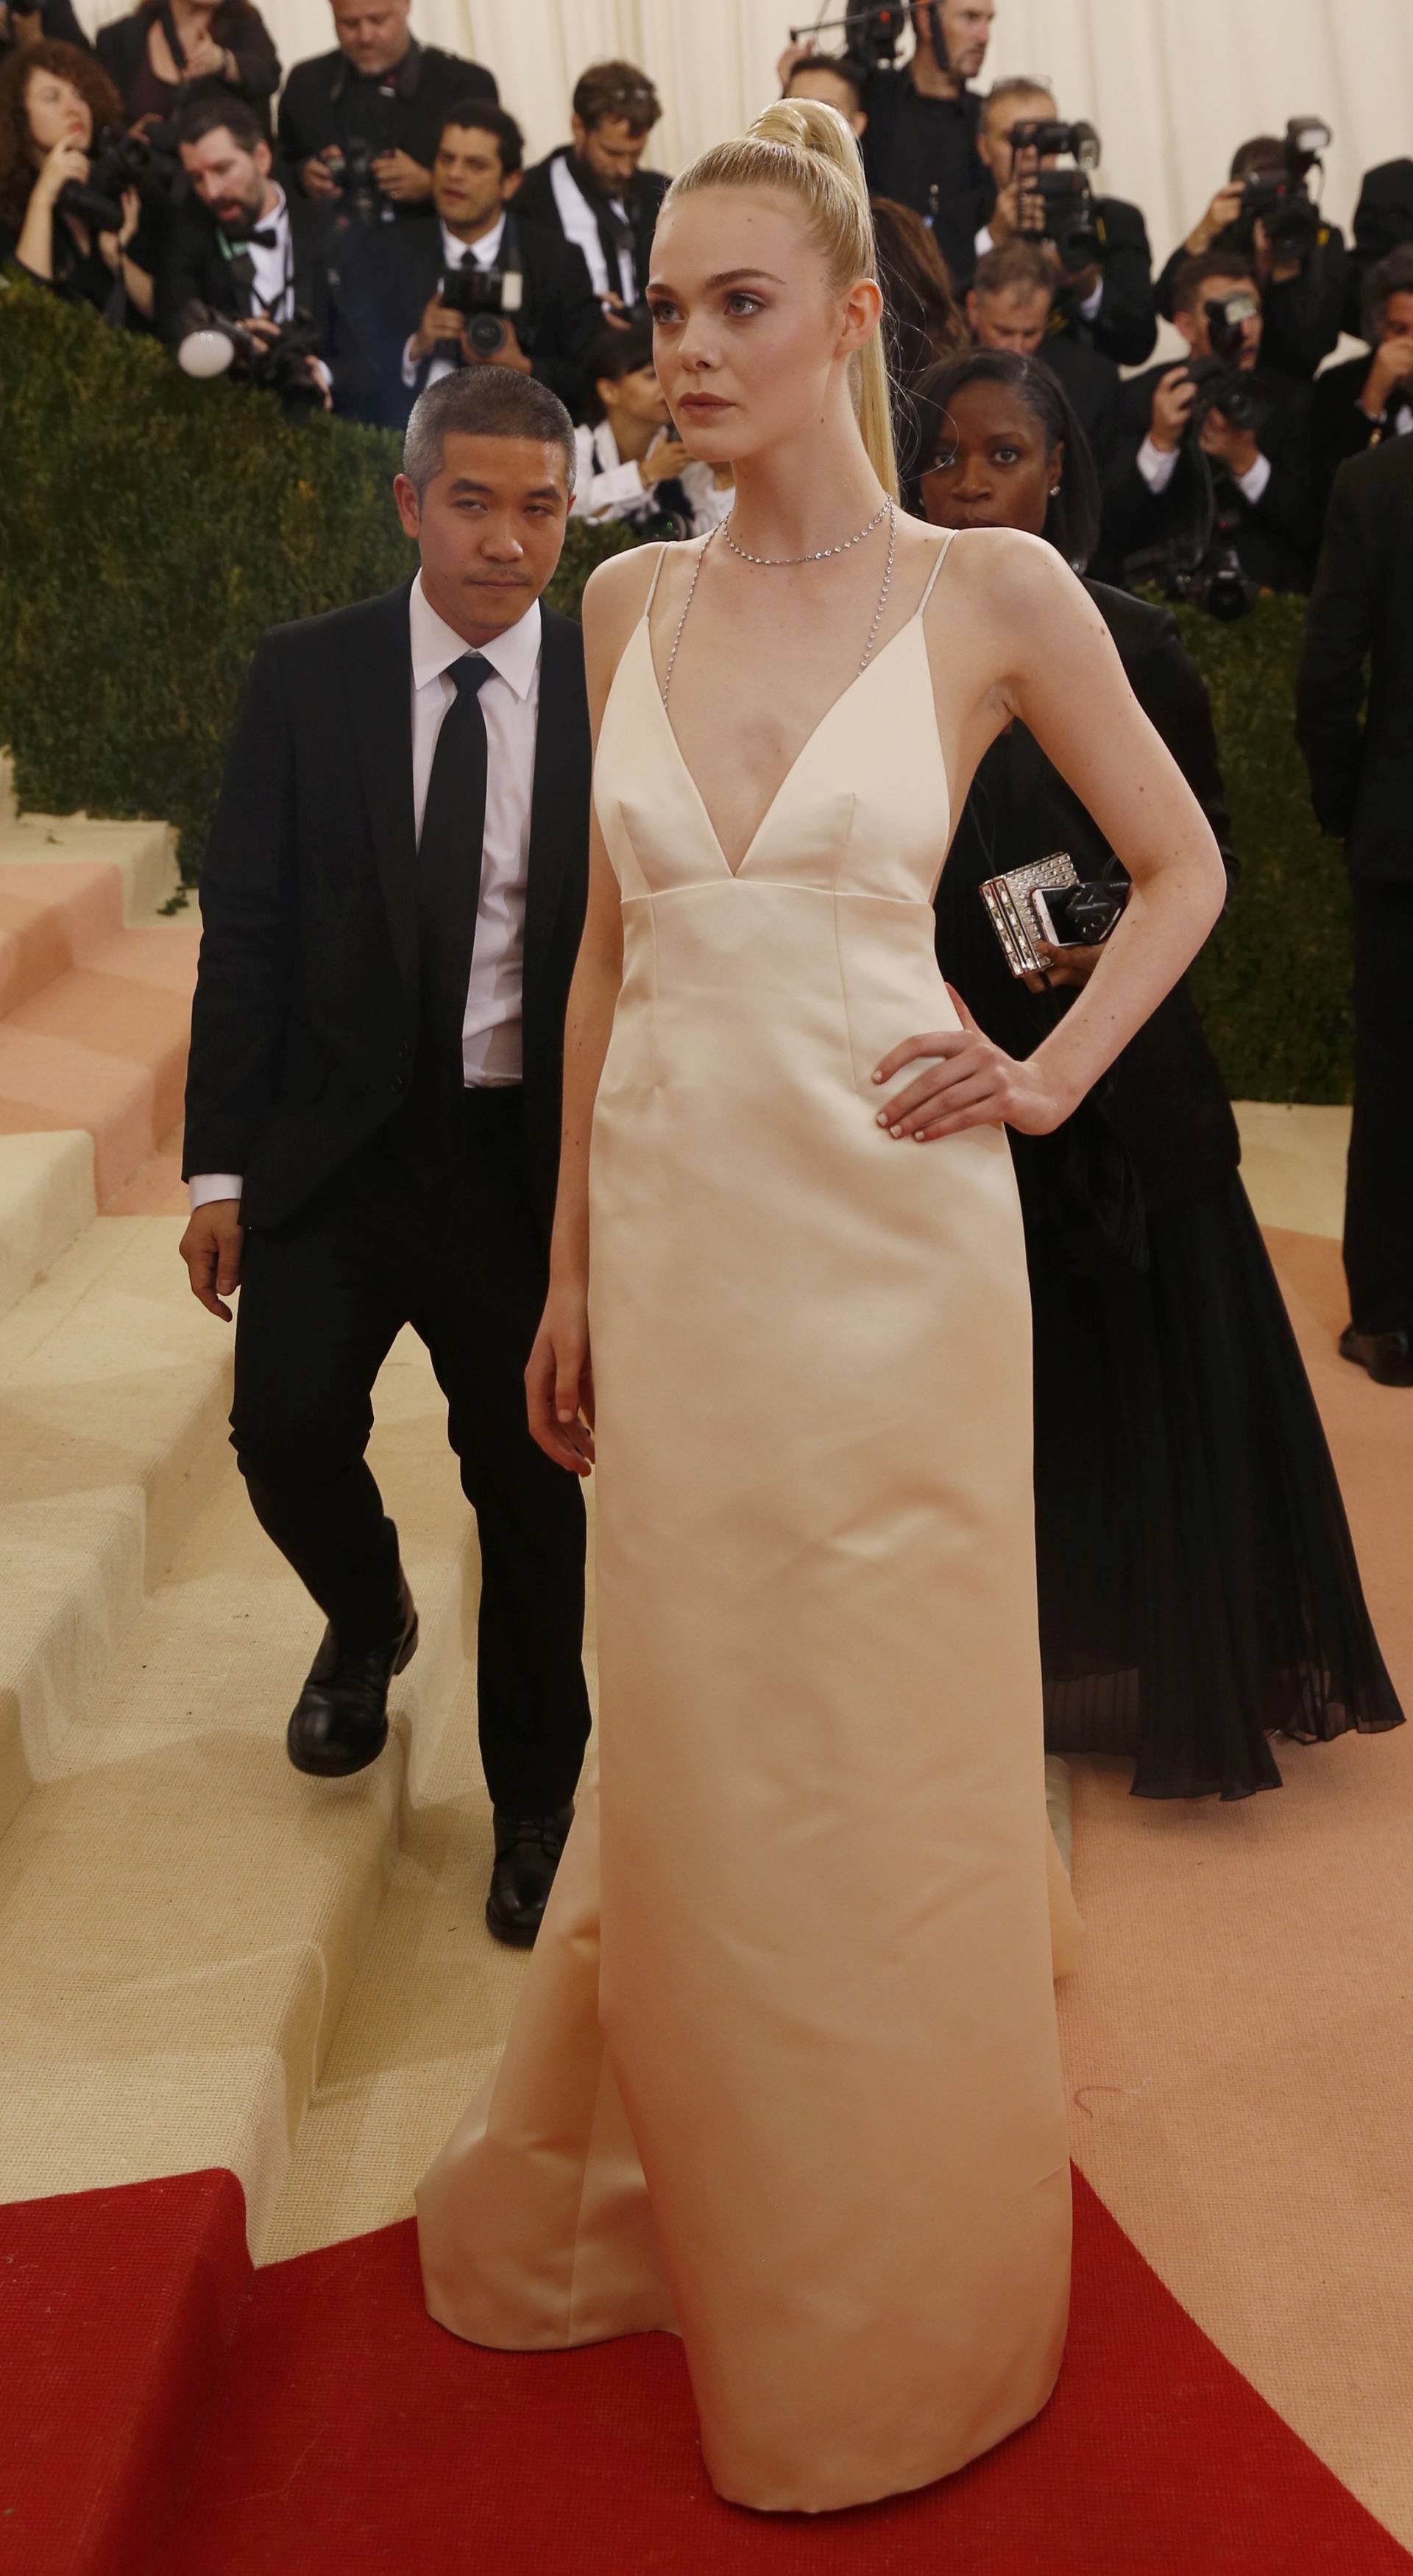 Actress Elle Fanning arrives at the Met Gala in New York